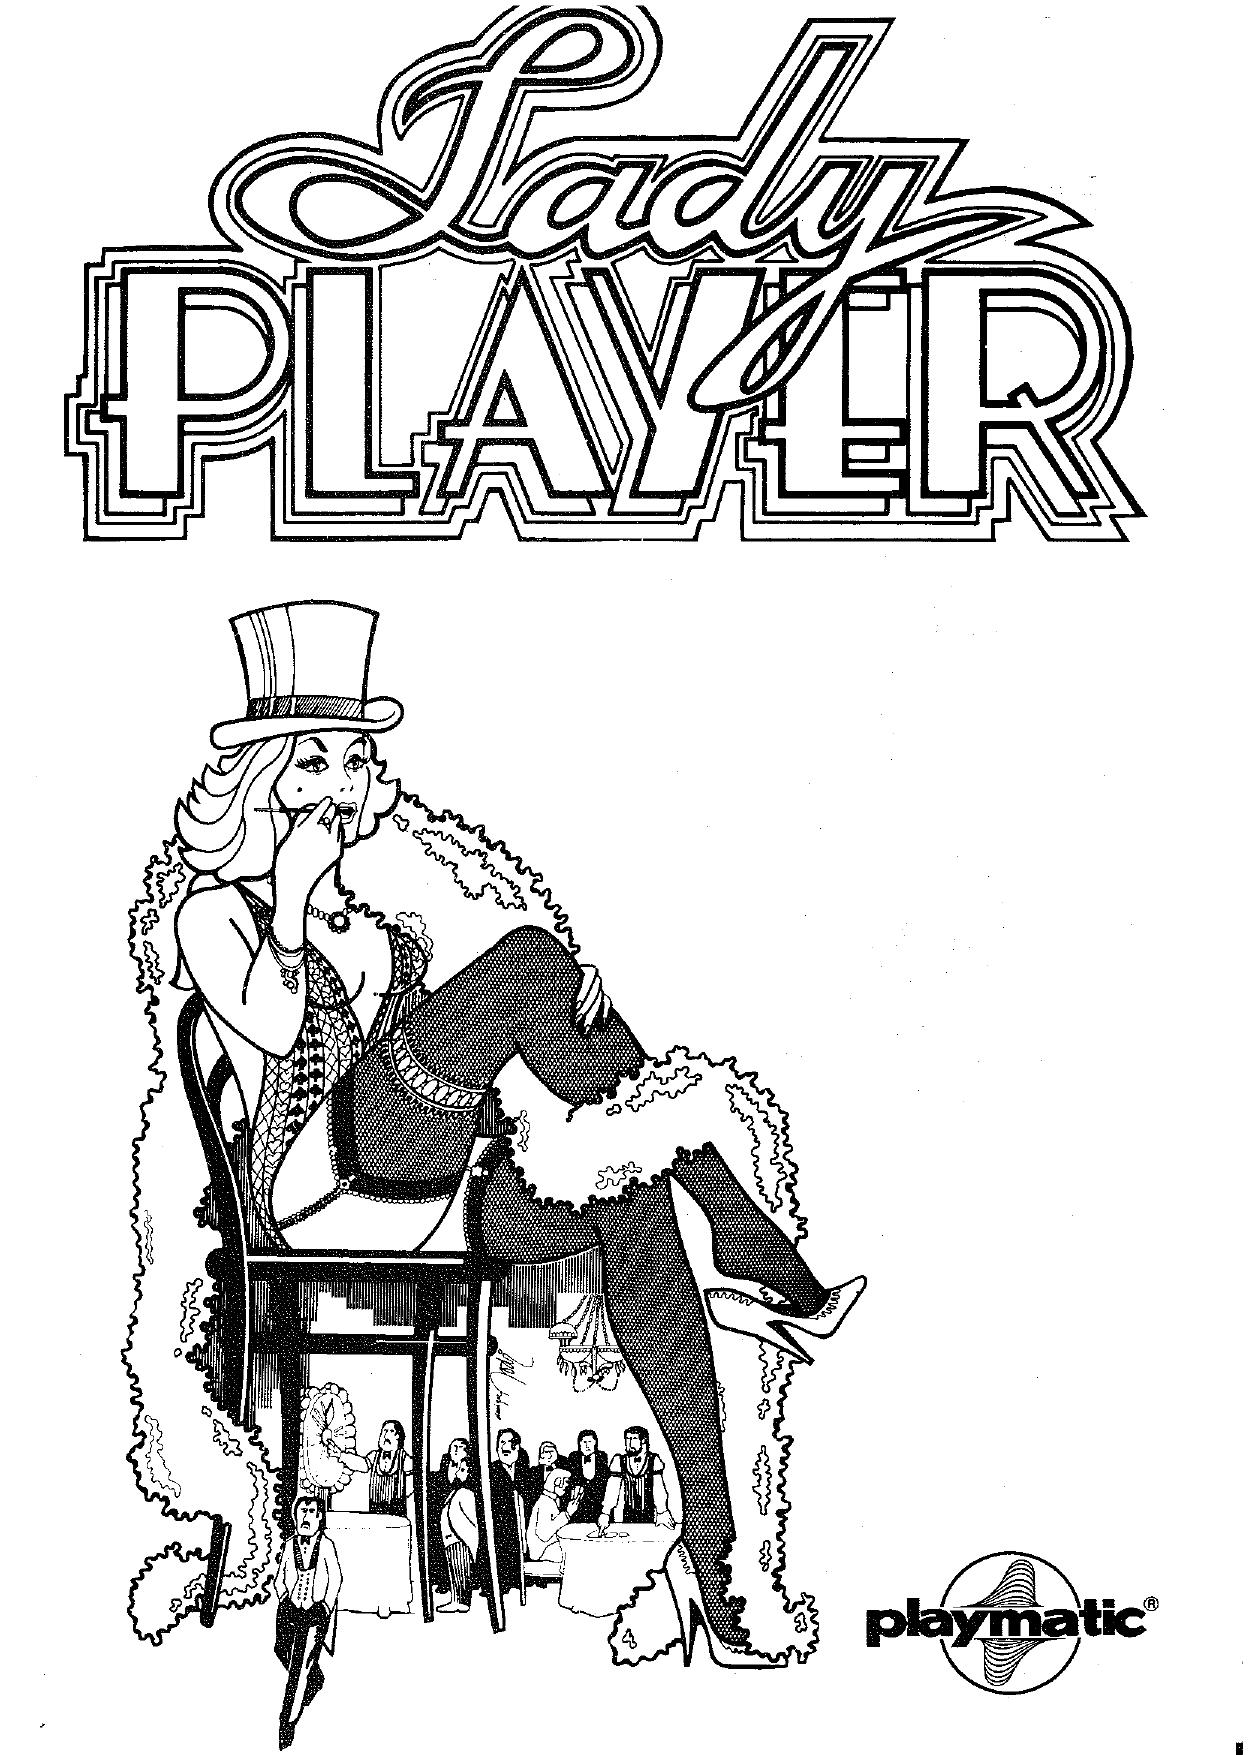 Lady Player [s]